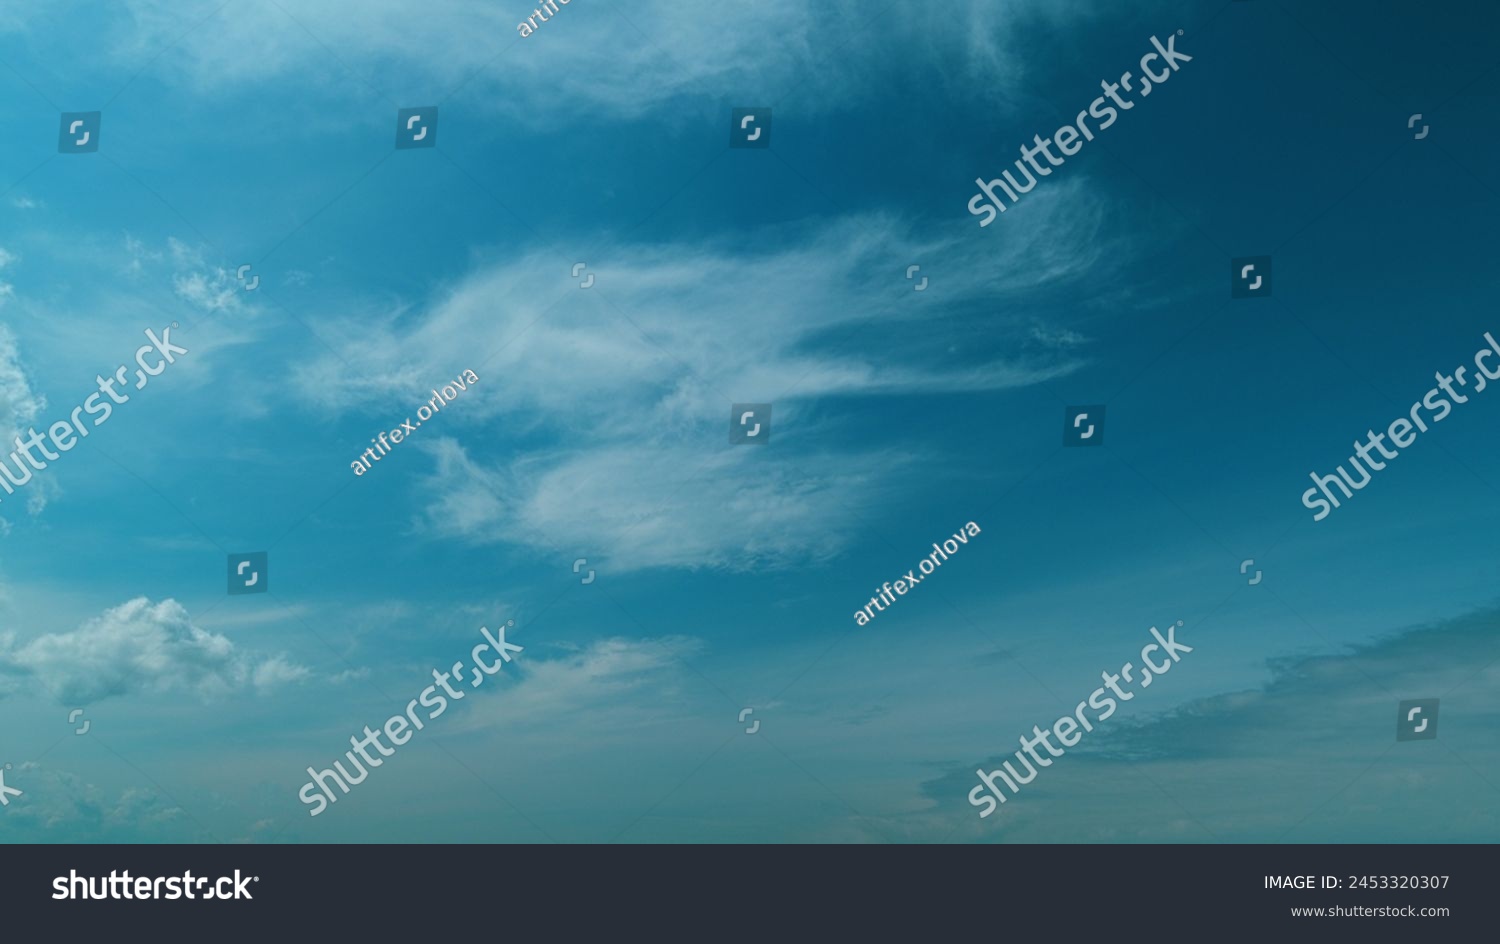 Soft White Clouds Moving On Blue Sky Background. Tropical Summer Or Spring Sunlight. No Birds And Free Of Defects #2453320307